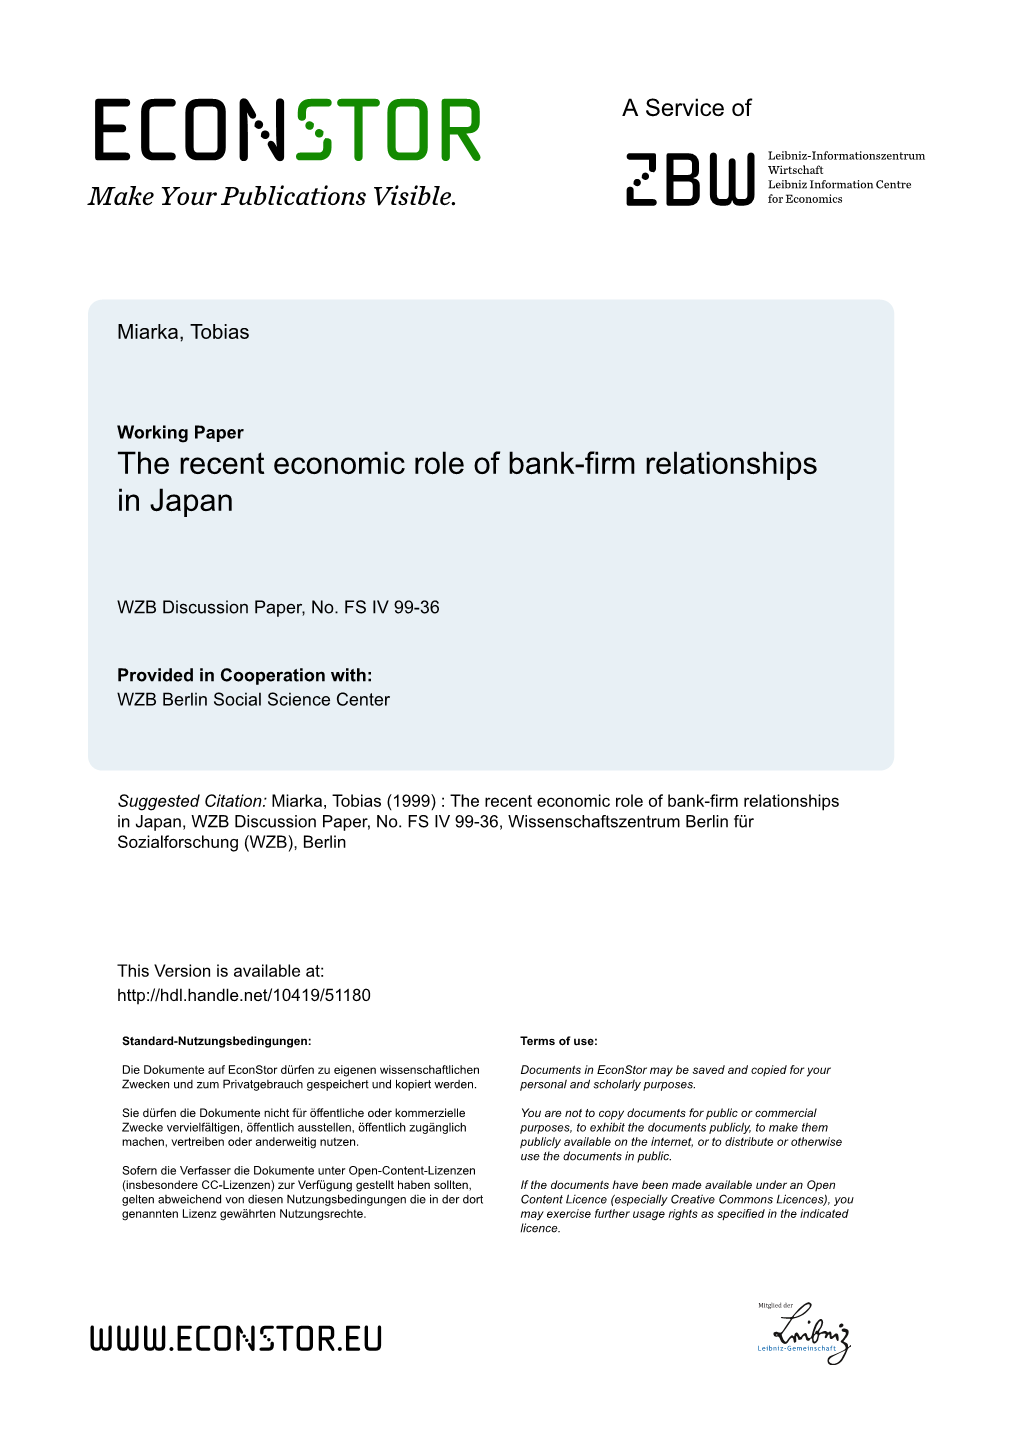 The Recent Economic Role of Bank-Firm Relationships in Japan